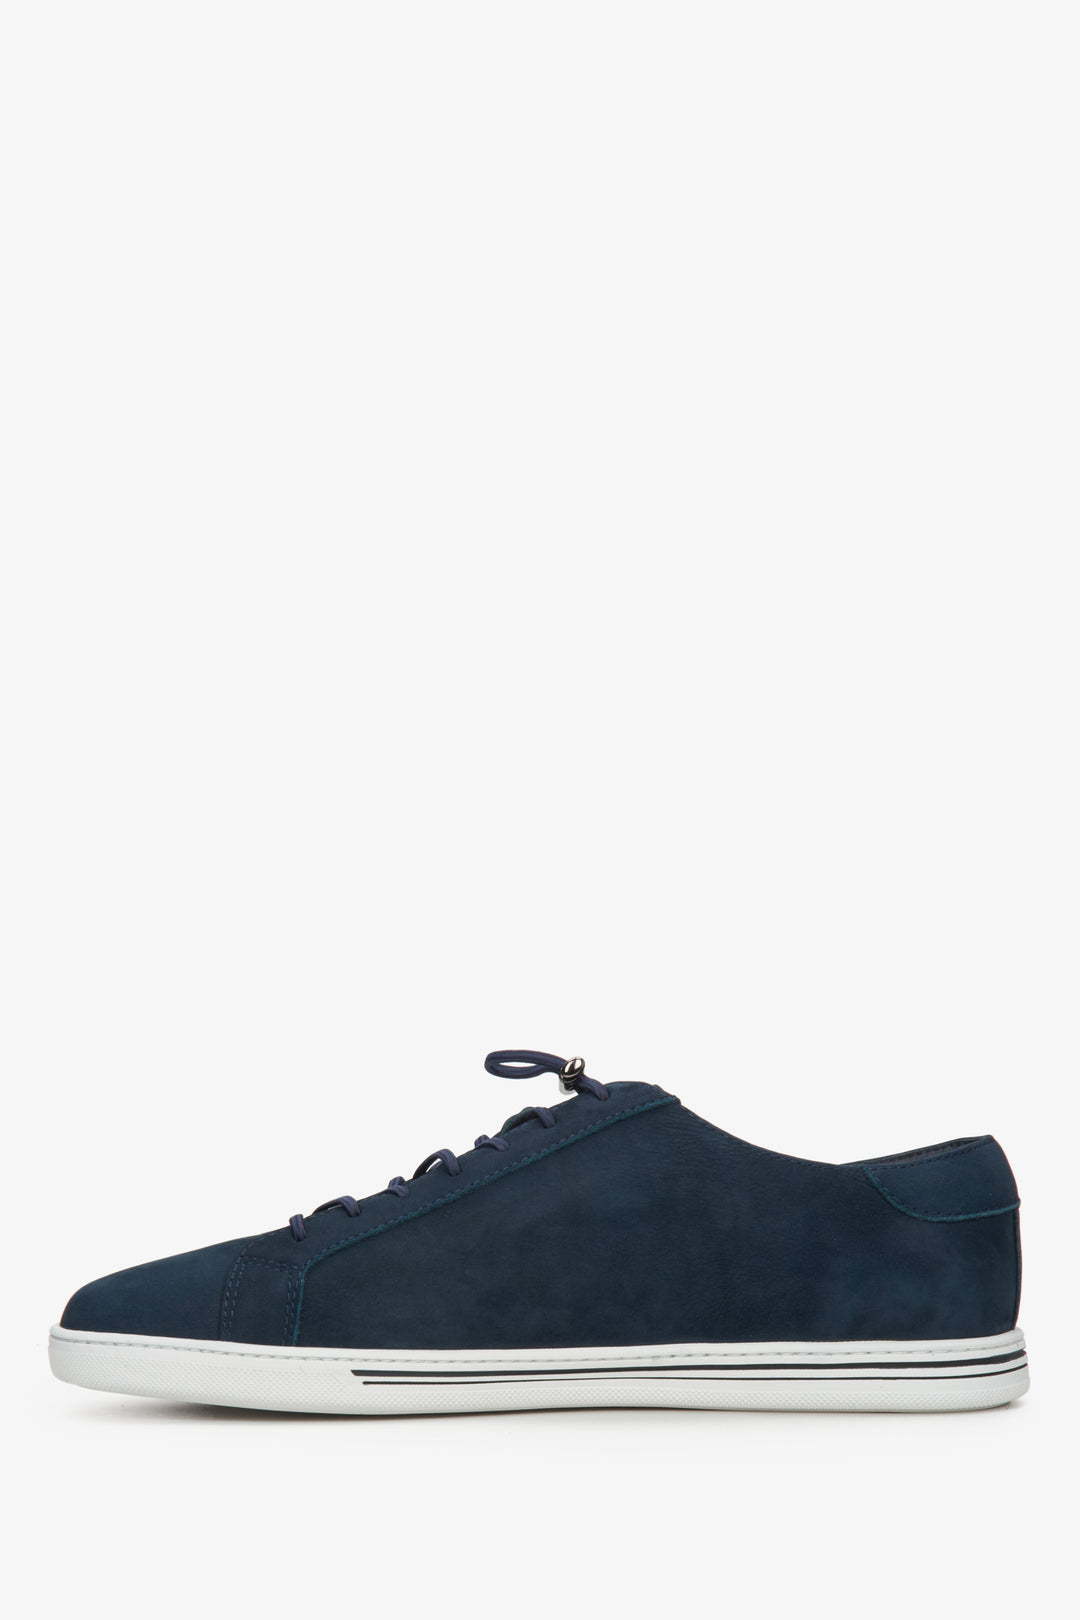 Navy blue men's nubuck sneakers with an elastic turnbuckle - shoe profile.